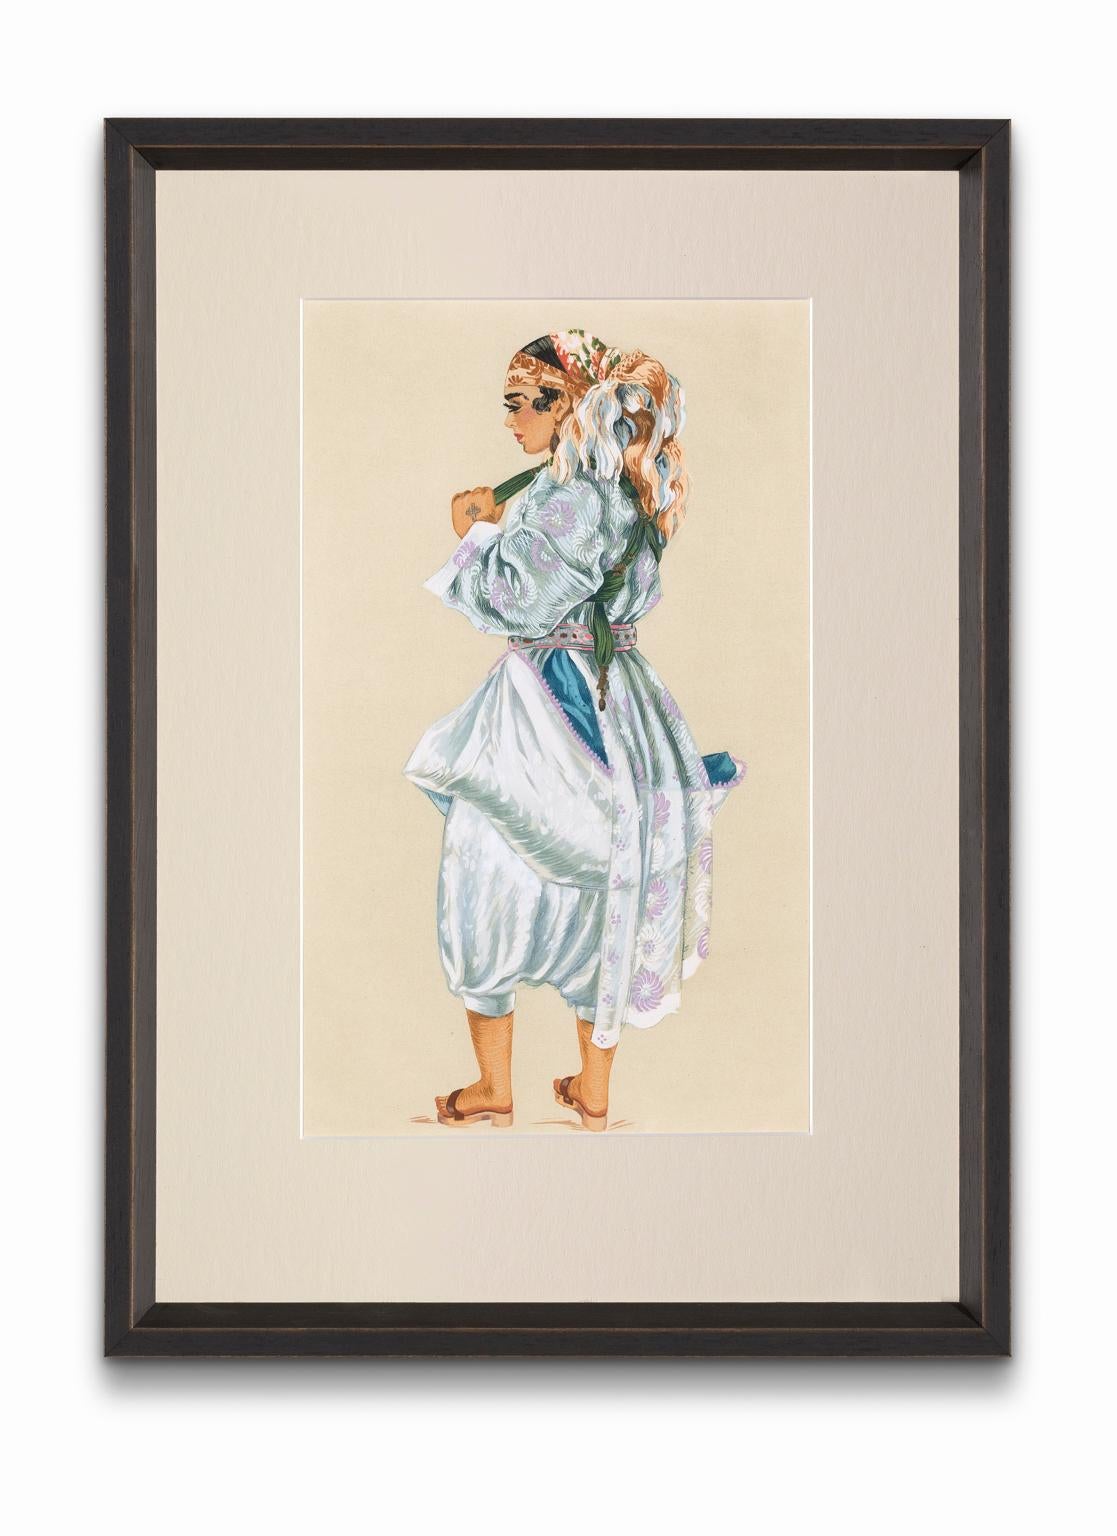 Jean Besancenot Portrait Print - "Townwoman Dressed For Housework" from "Costumes of Morocco", Gouache on Paper